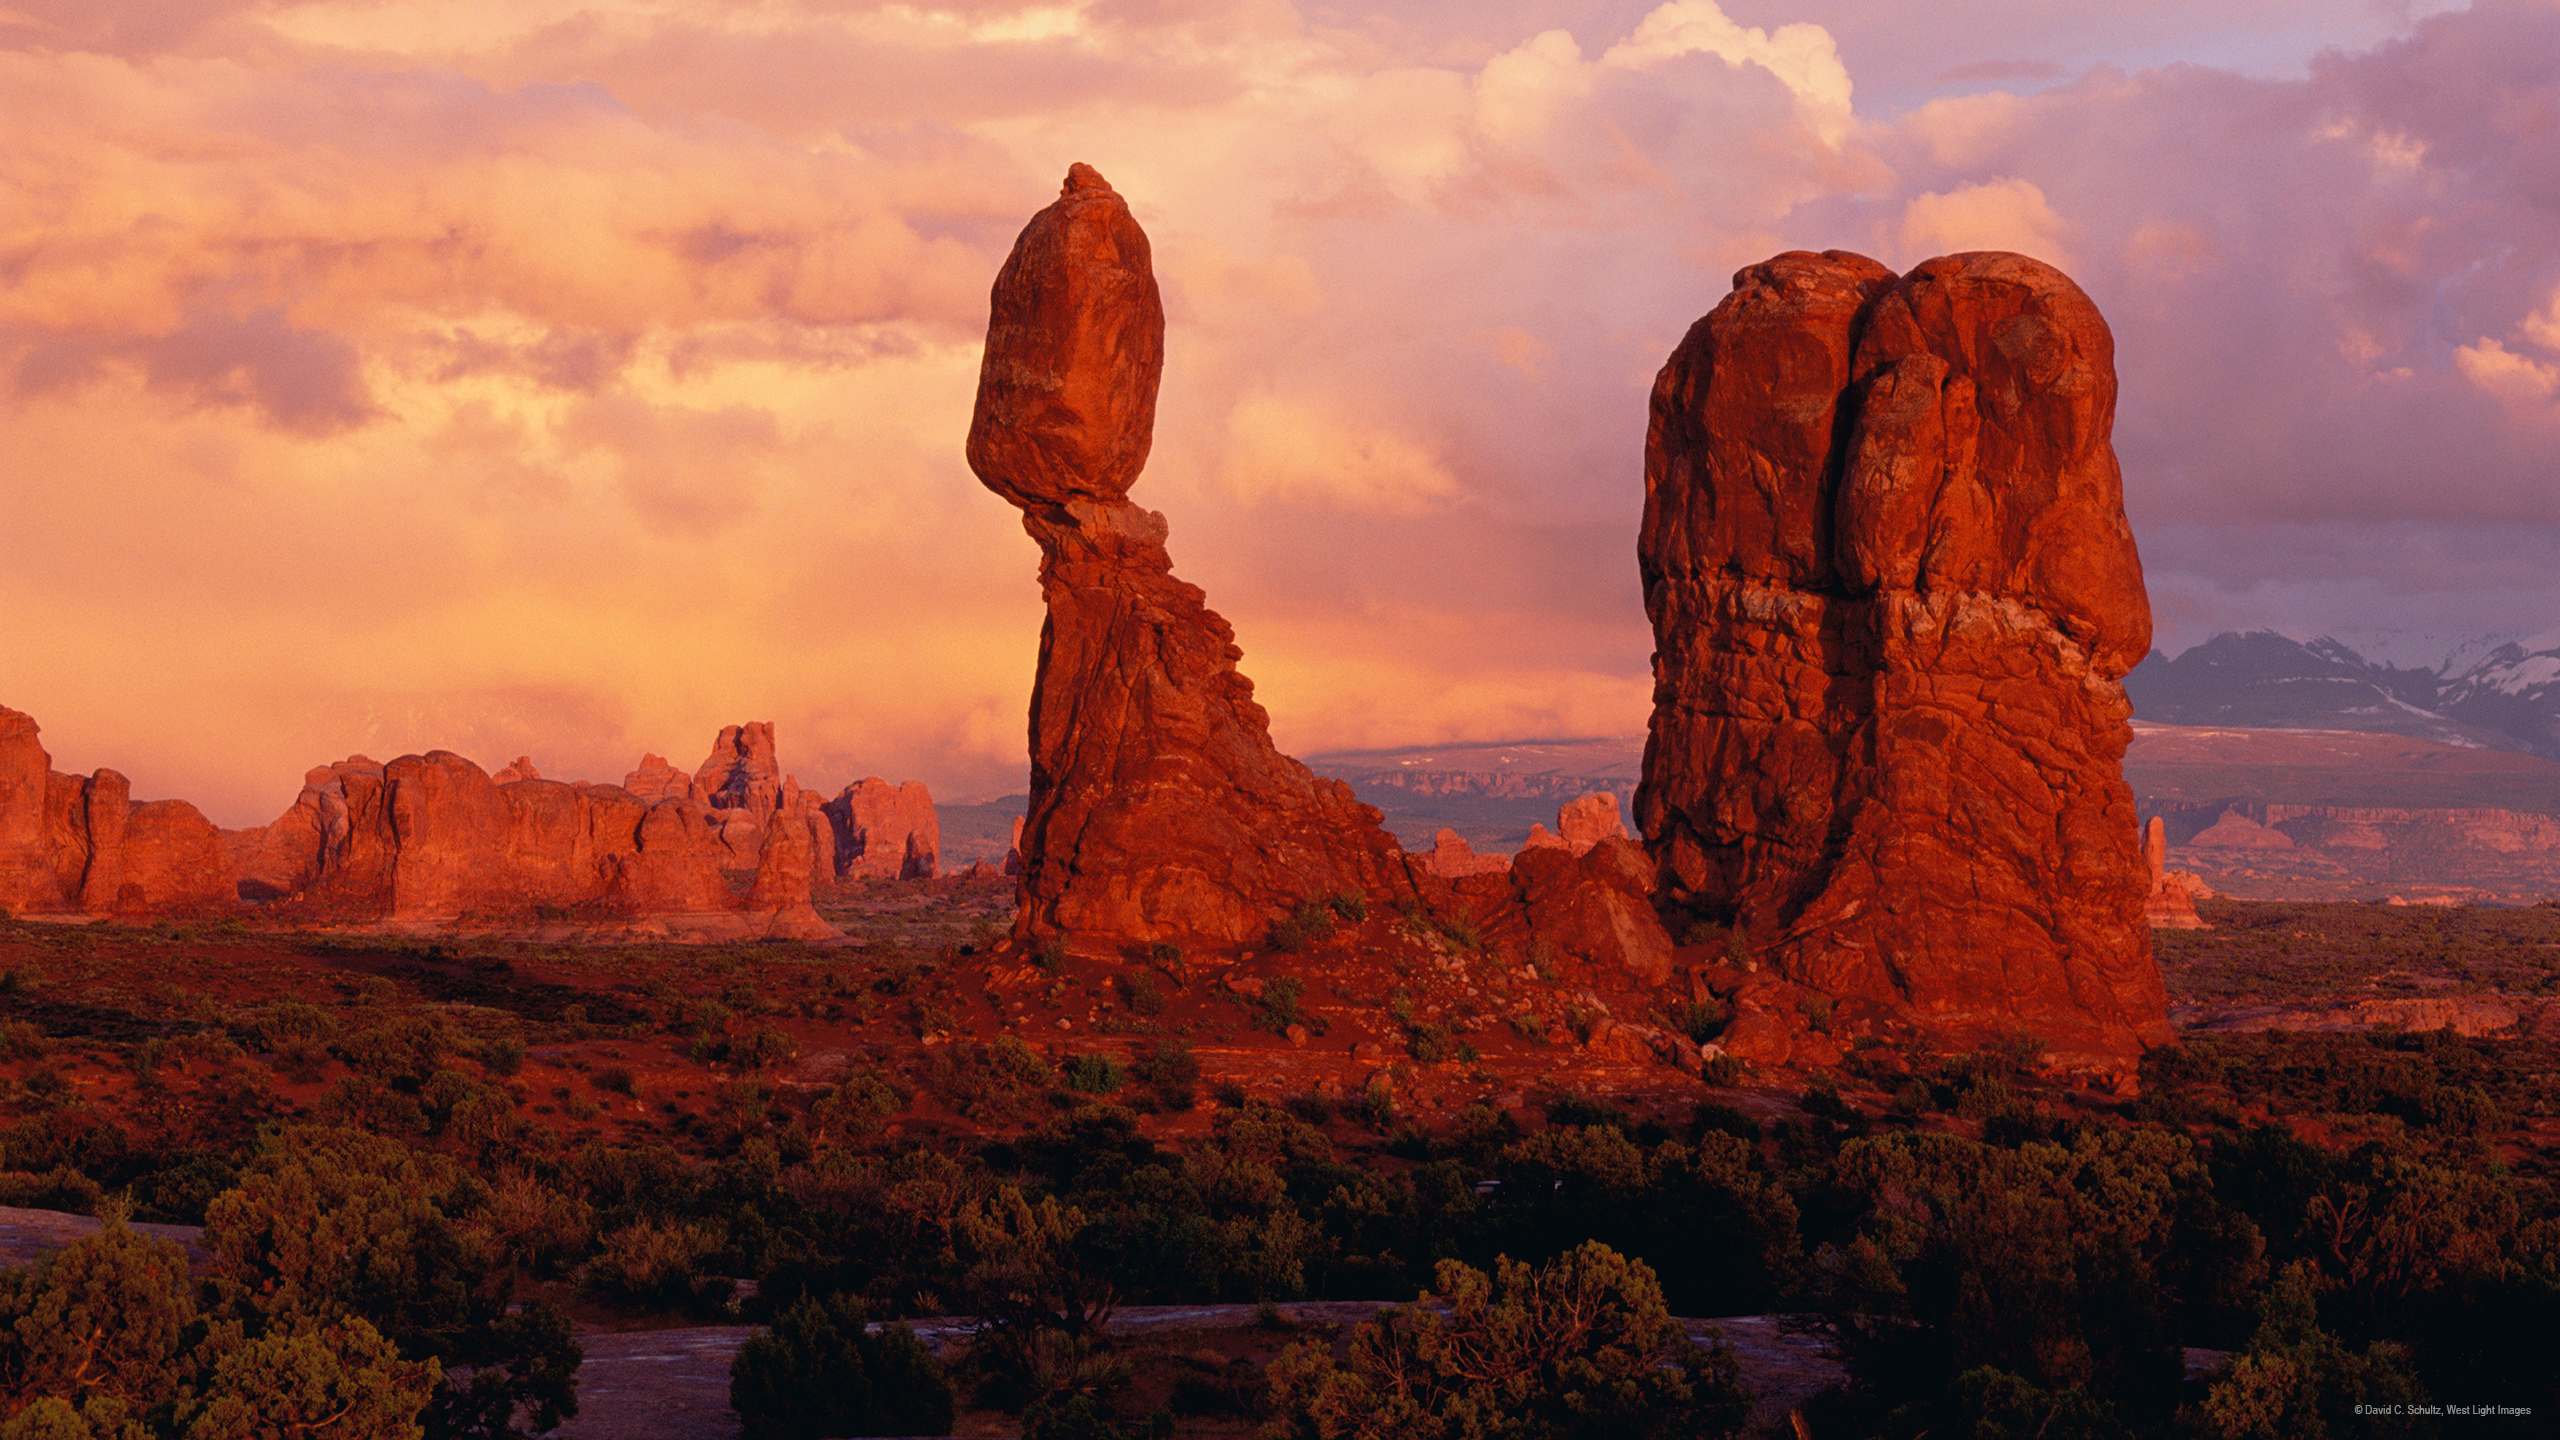 Wallpaper: Arches National Park | AAAS MemberCentral